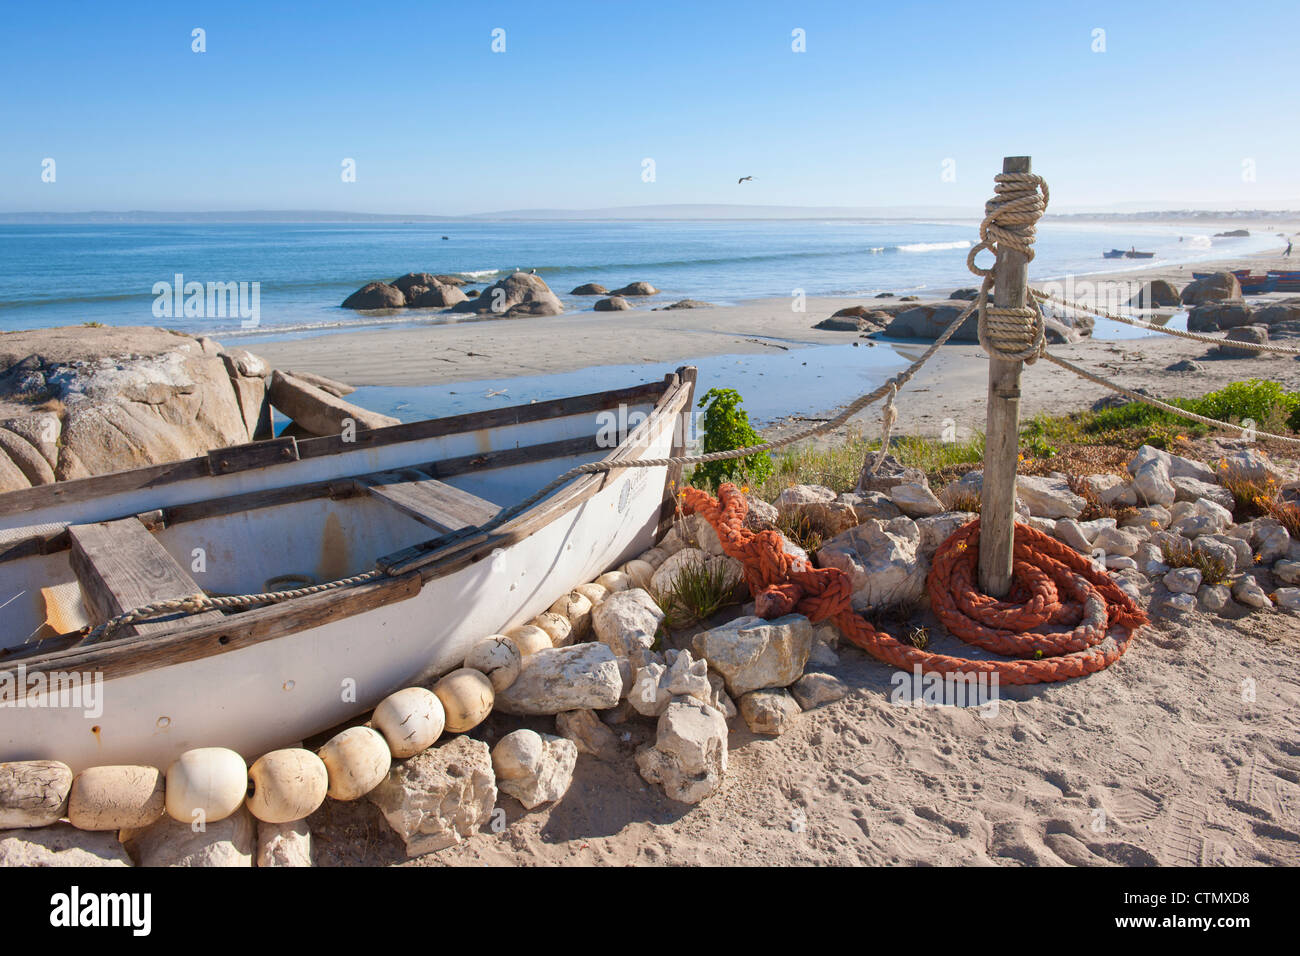 A traditional fishing boat on the beach at Paternoster, Western Cape, South Africa Stock Photo